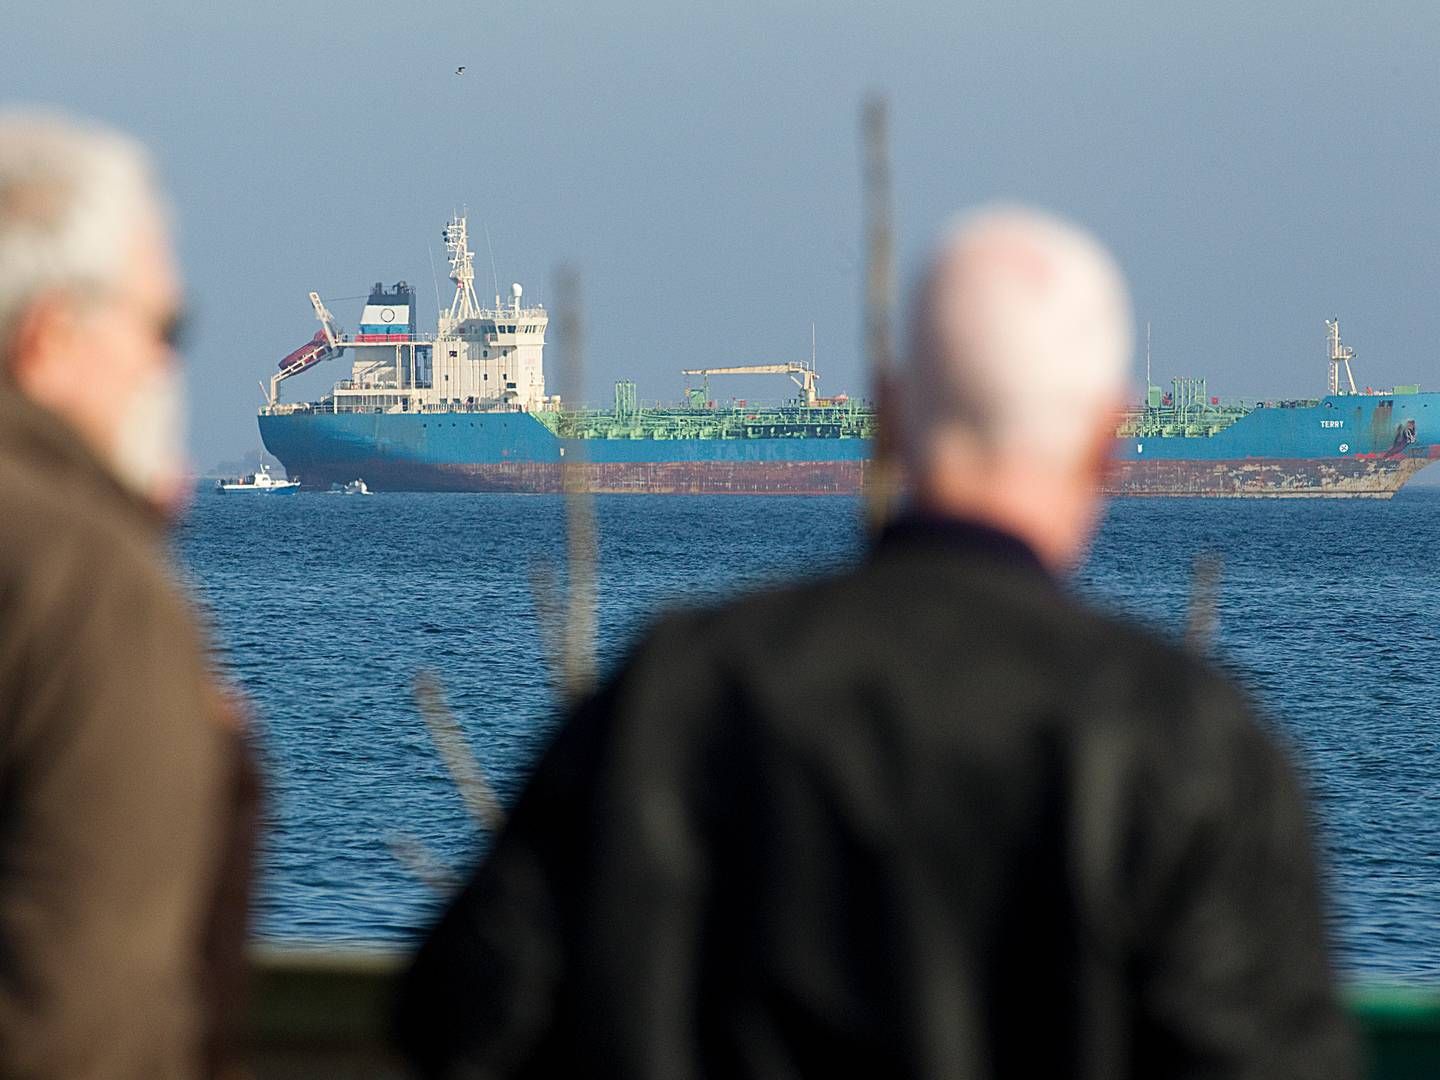 On Jan. 1, 2020, the International Maritime Organization (IMO) introduced rules forcing shipping companies to reduce the sulfur content of their marine fuels from 3.5% to 0.5%.